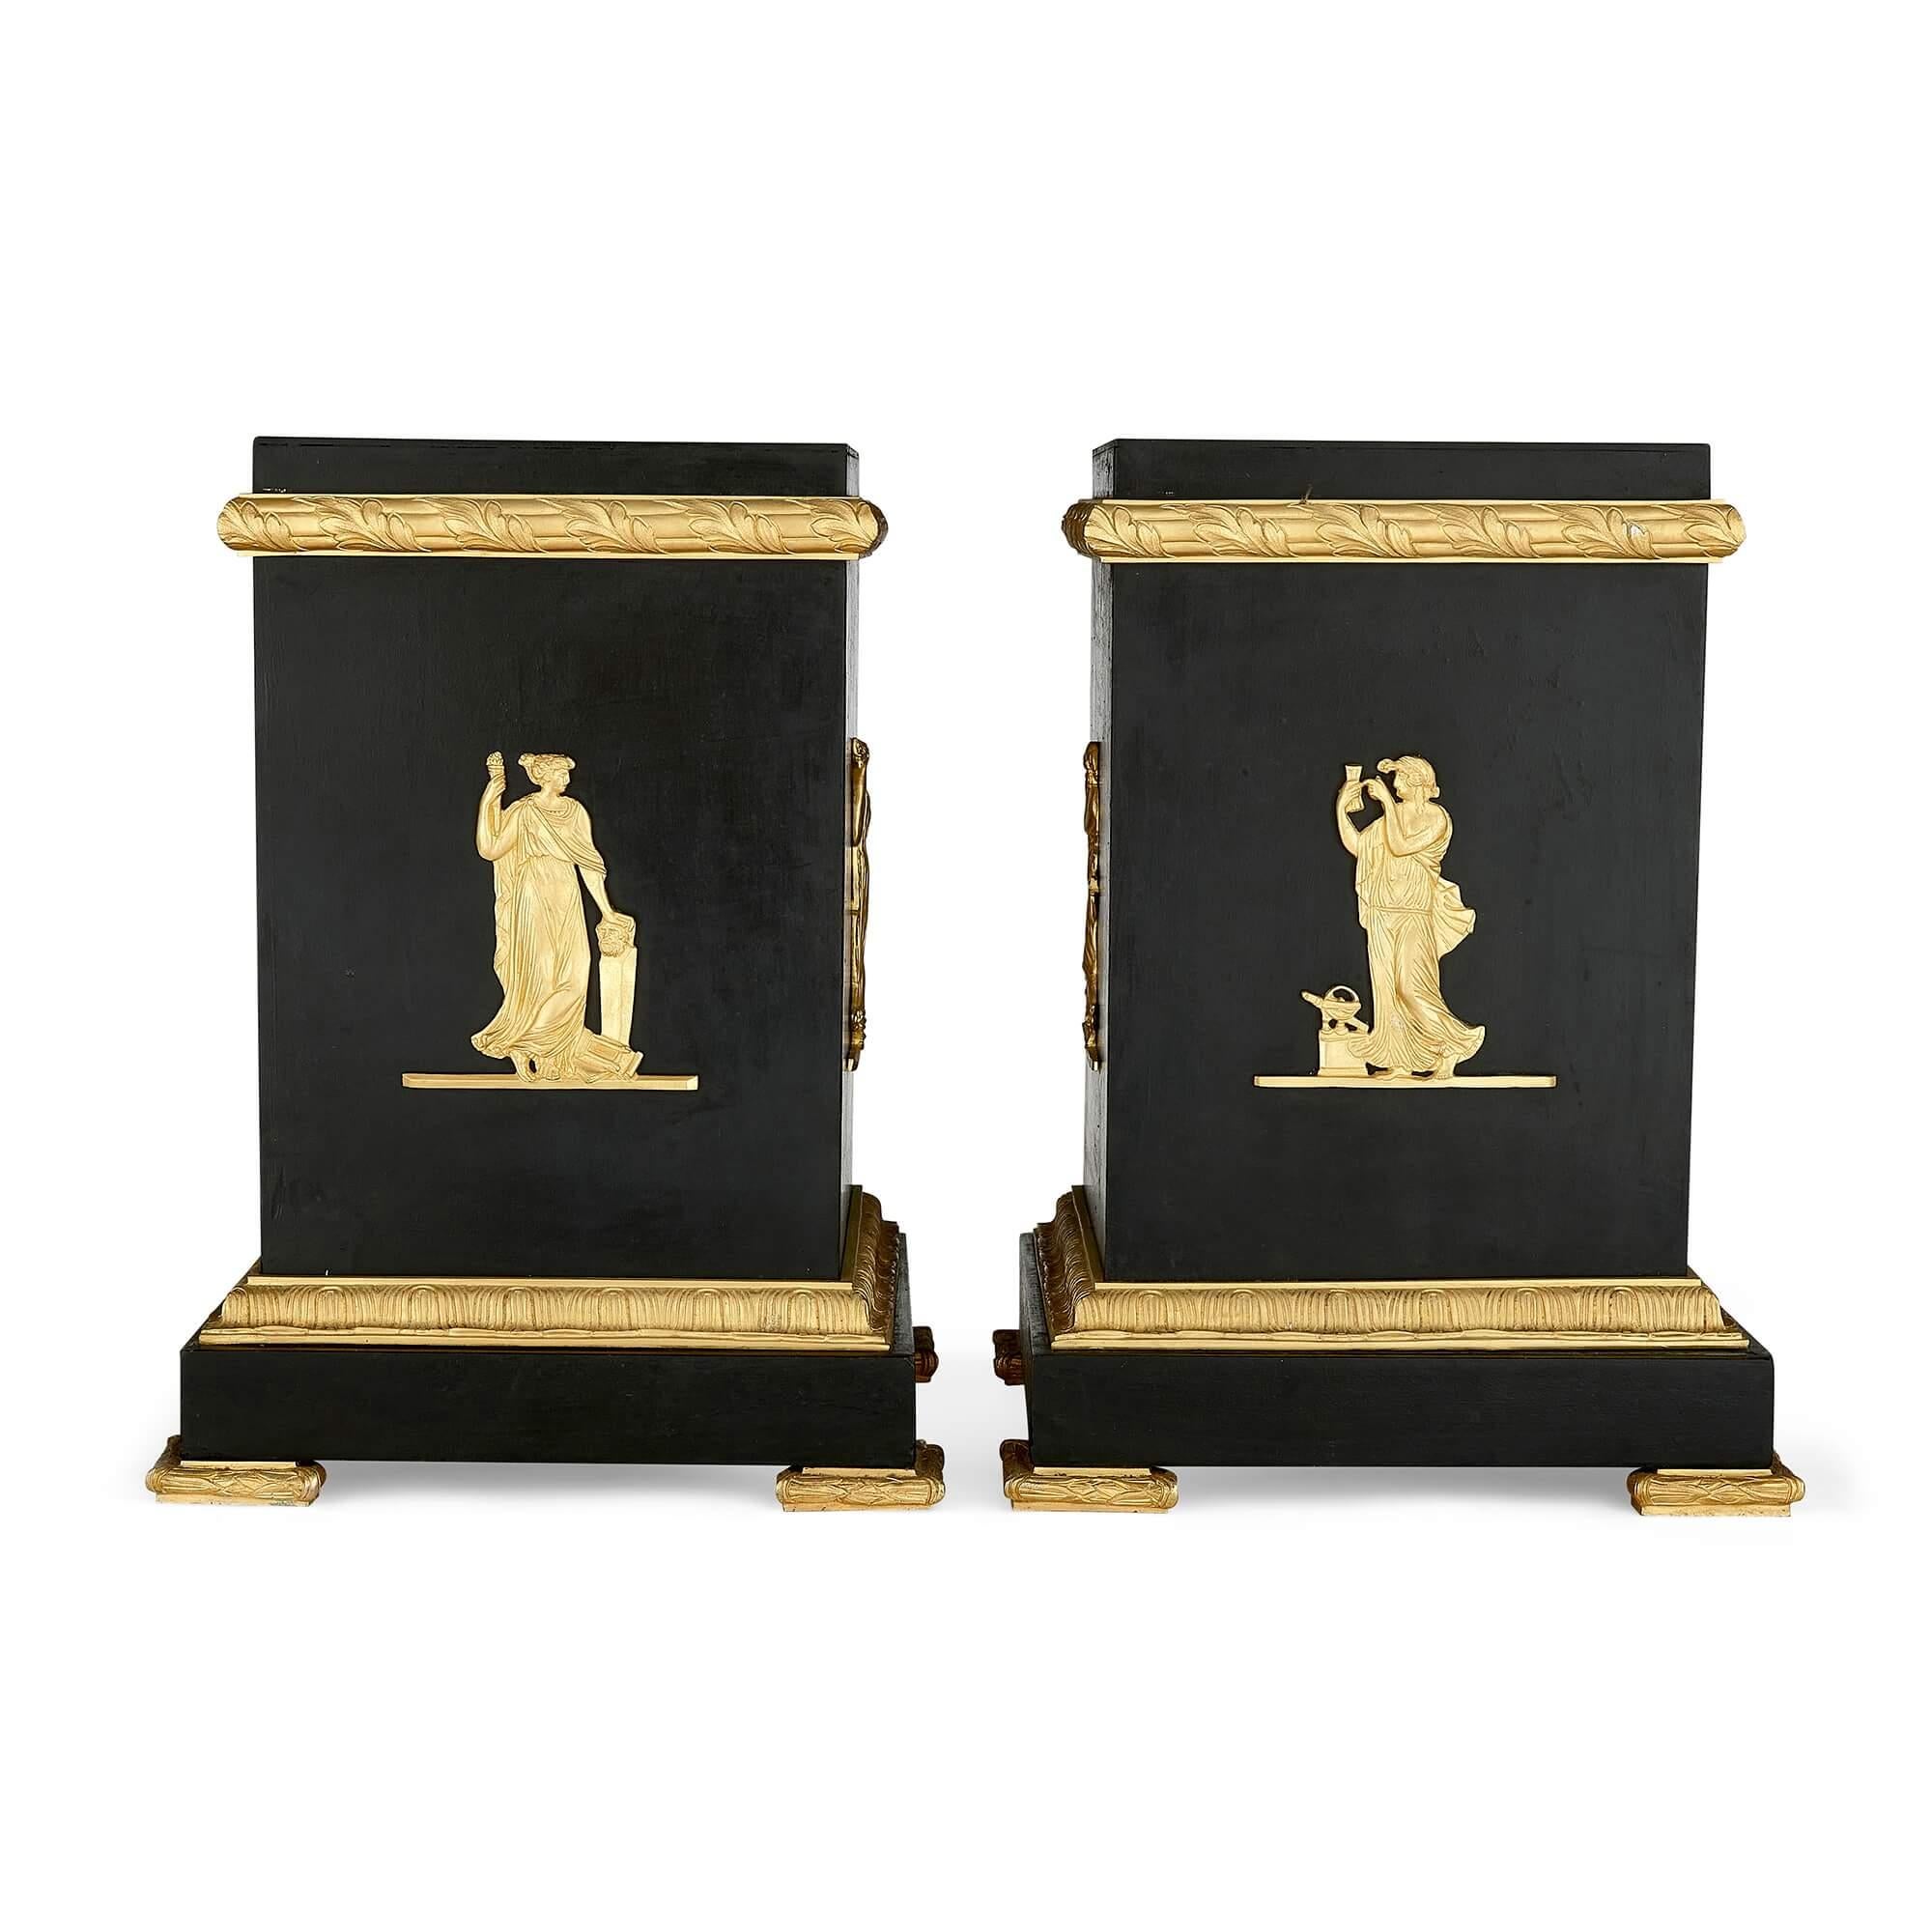 A pair of Empire-style Neoclassical gilt and patinated bronze stands
French, 20th Century
42cm high x 31cm wide x 31 cm depth

Made from patinated bronze and gilt bronze in the French Empire style, with Neoclassical influences, these excellent